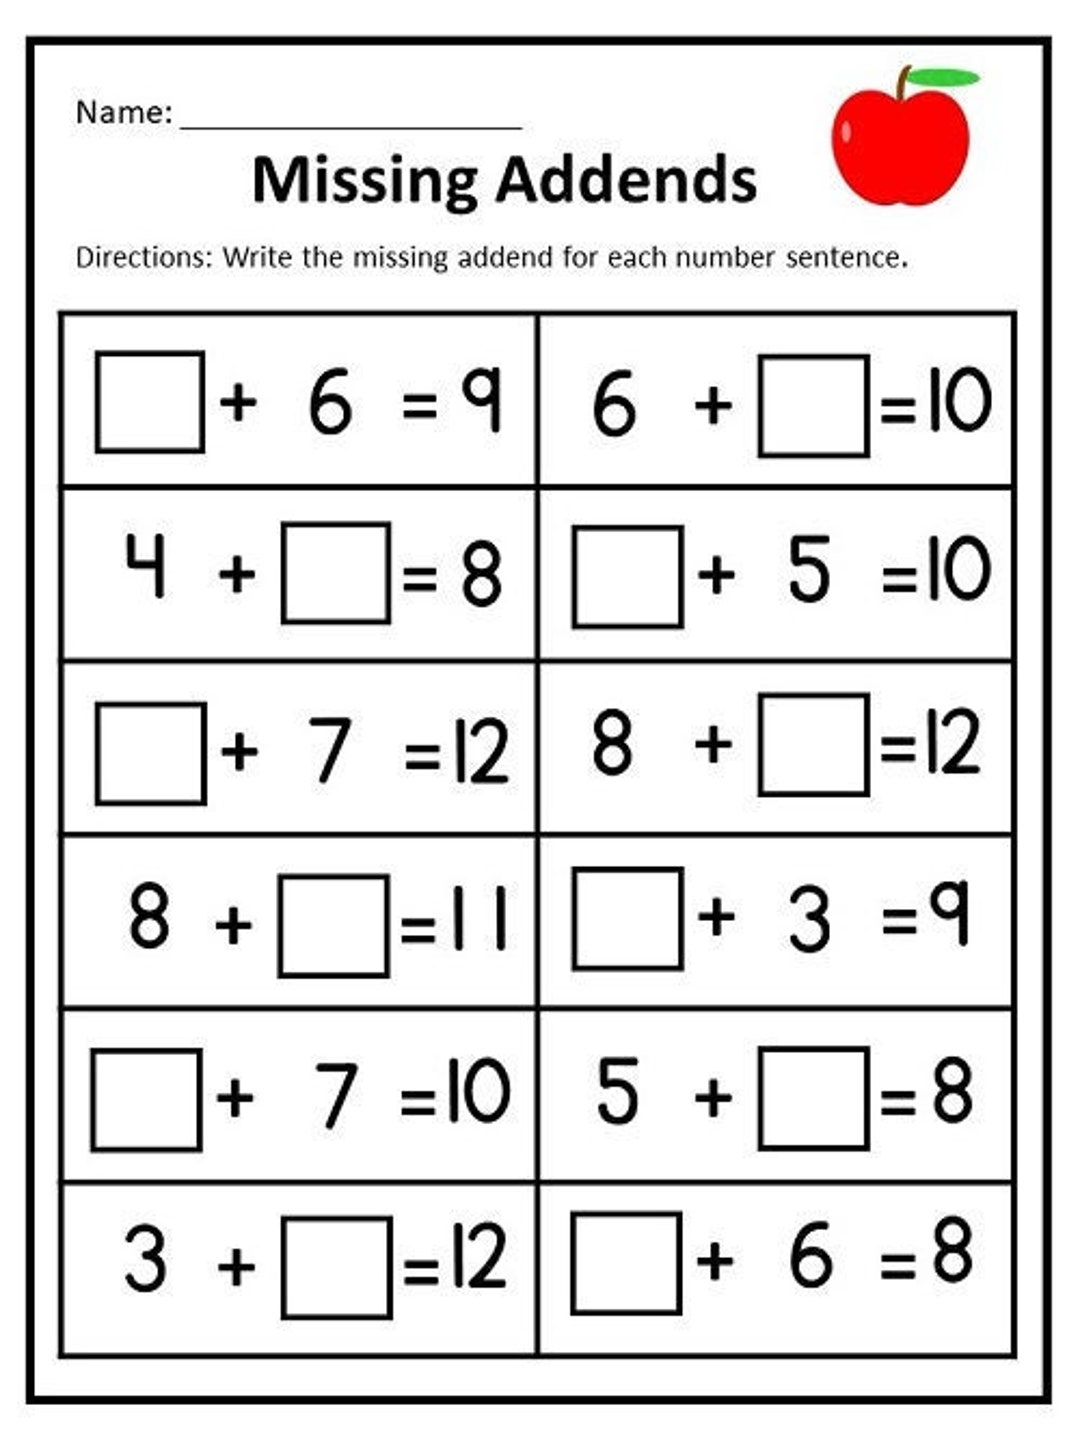 10-printable-missing-addends-worksheets-numbers-1-20-for-etsy